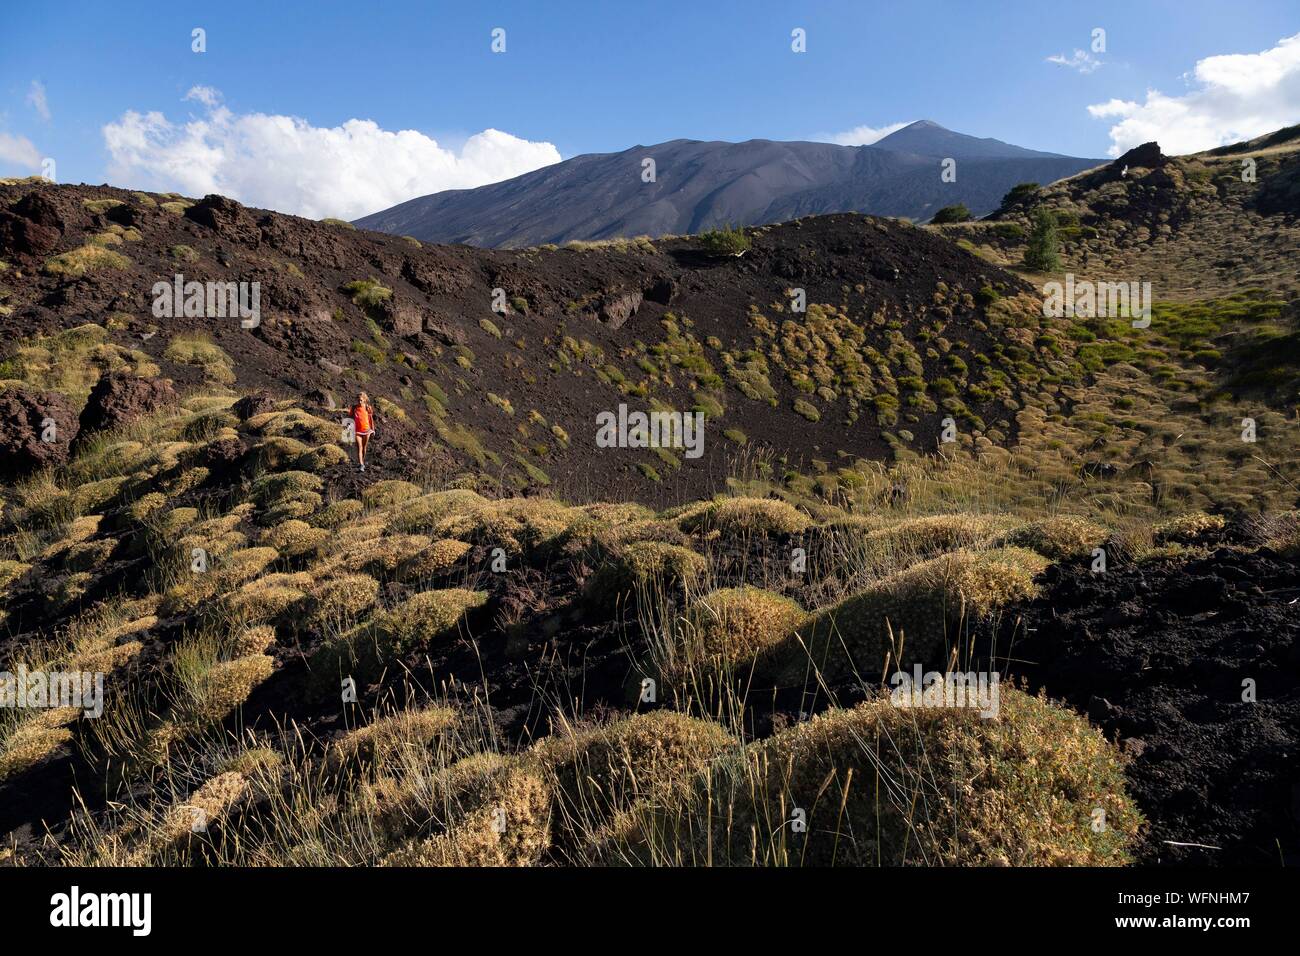 Italy, Sicily, Mount Etna Regional Nature Park, Mount Etna, UNESCO World Heritage Site, North Slope, Pads of Astragalus siculus, endemic species of Etna, woman practicing hiking Stock Photo